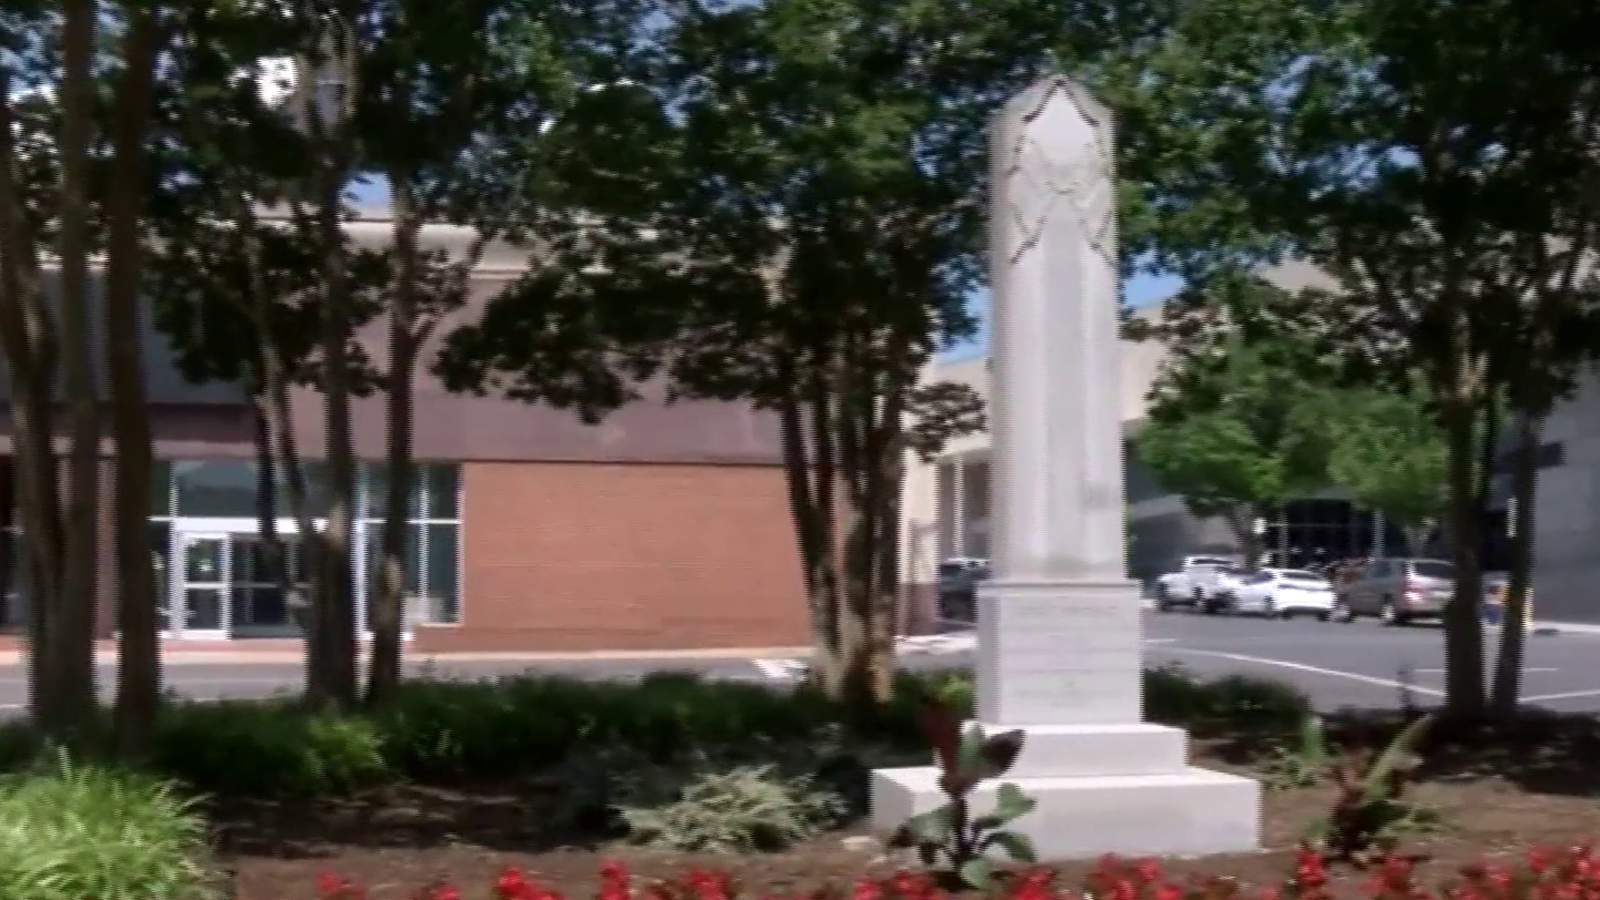 Roanoke’s Lee Monument will be moved to Evergreen Burial Park